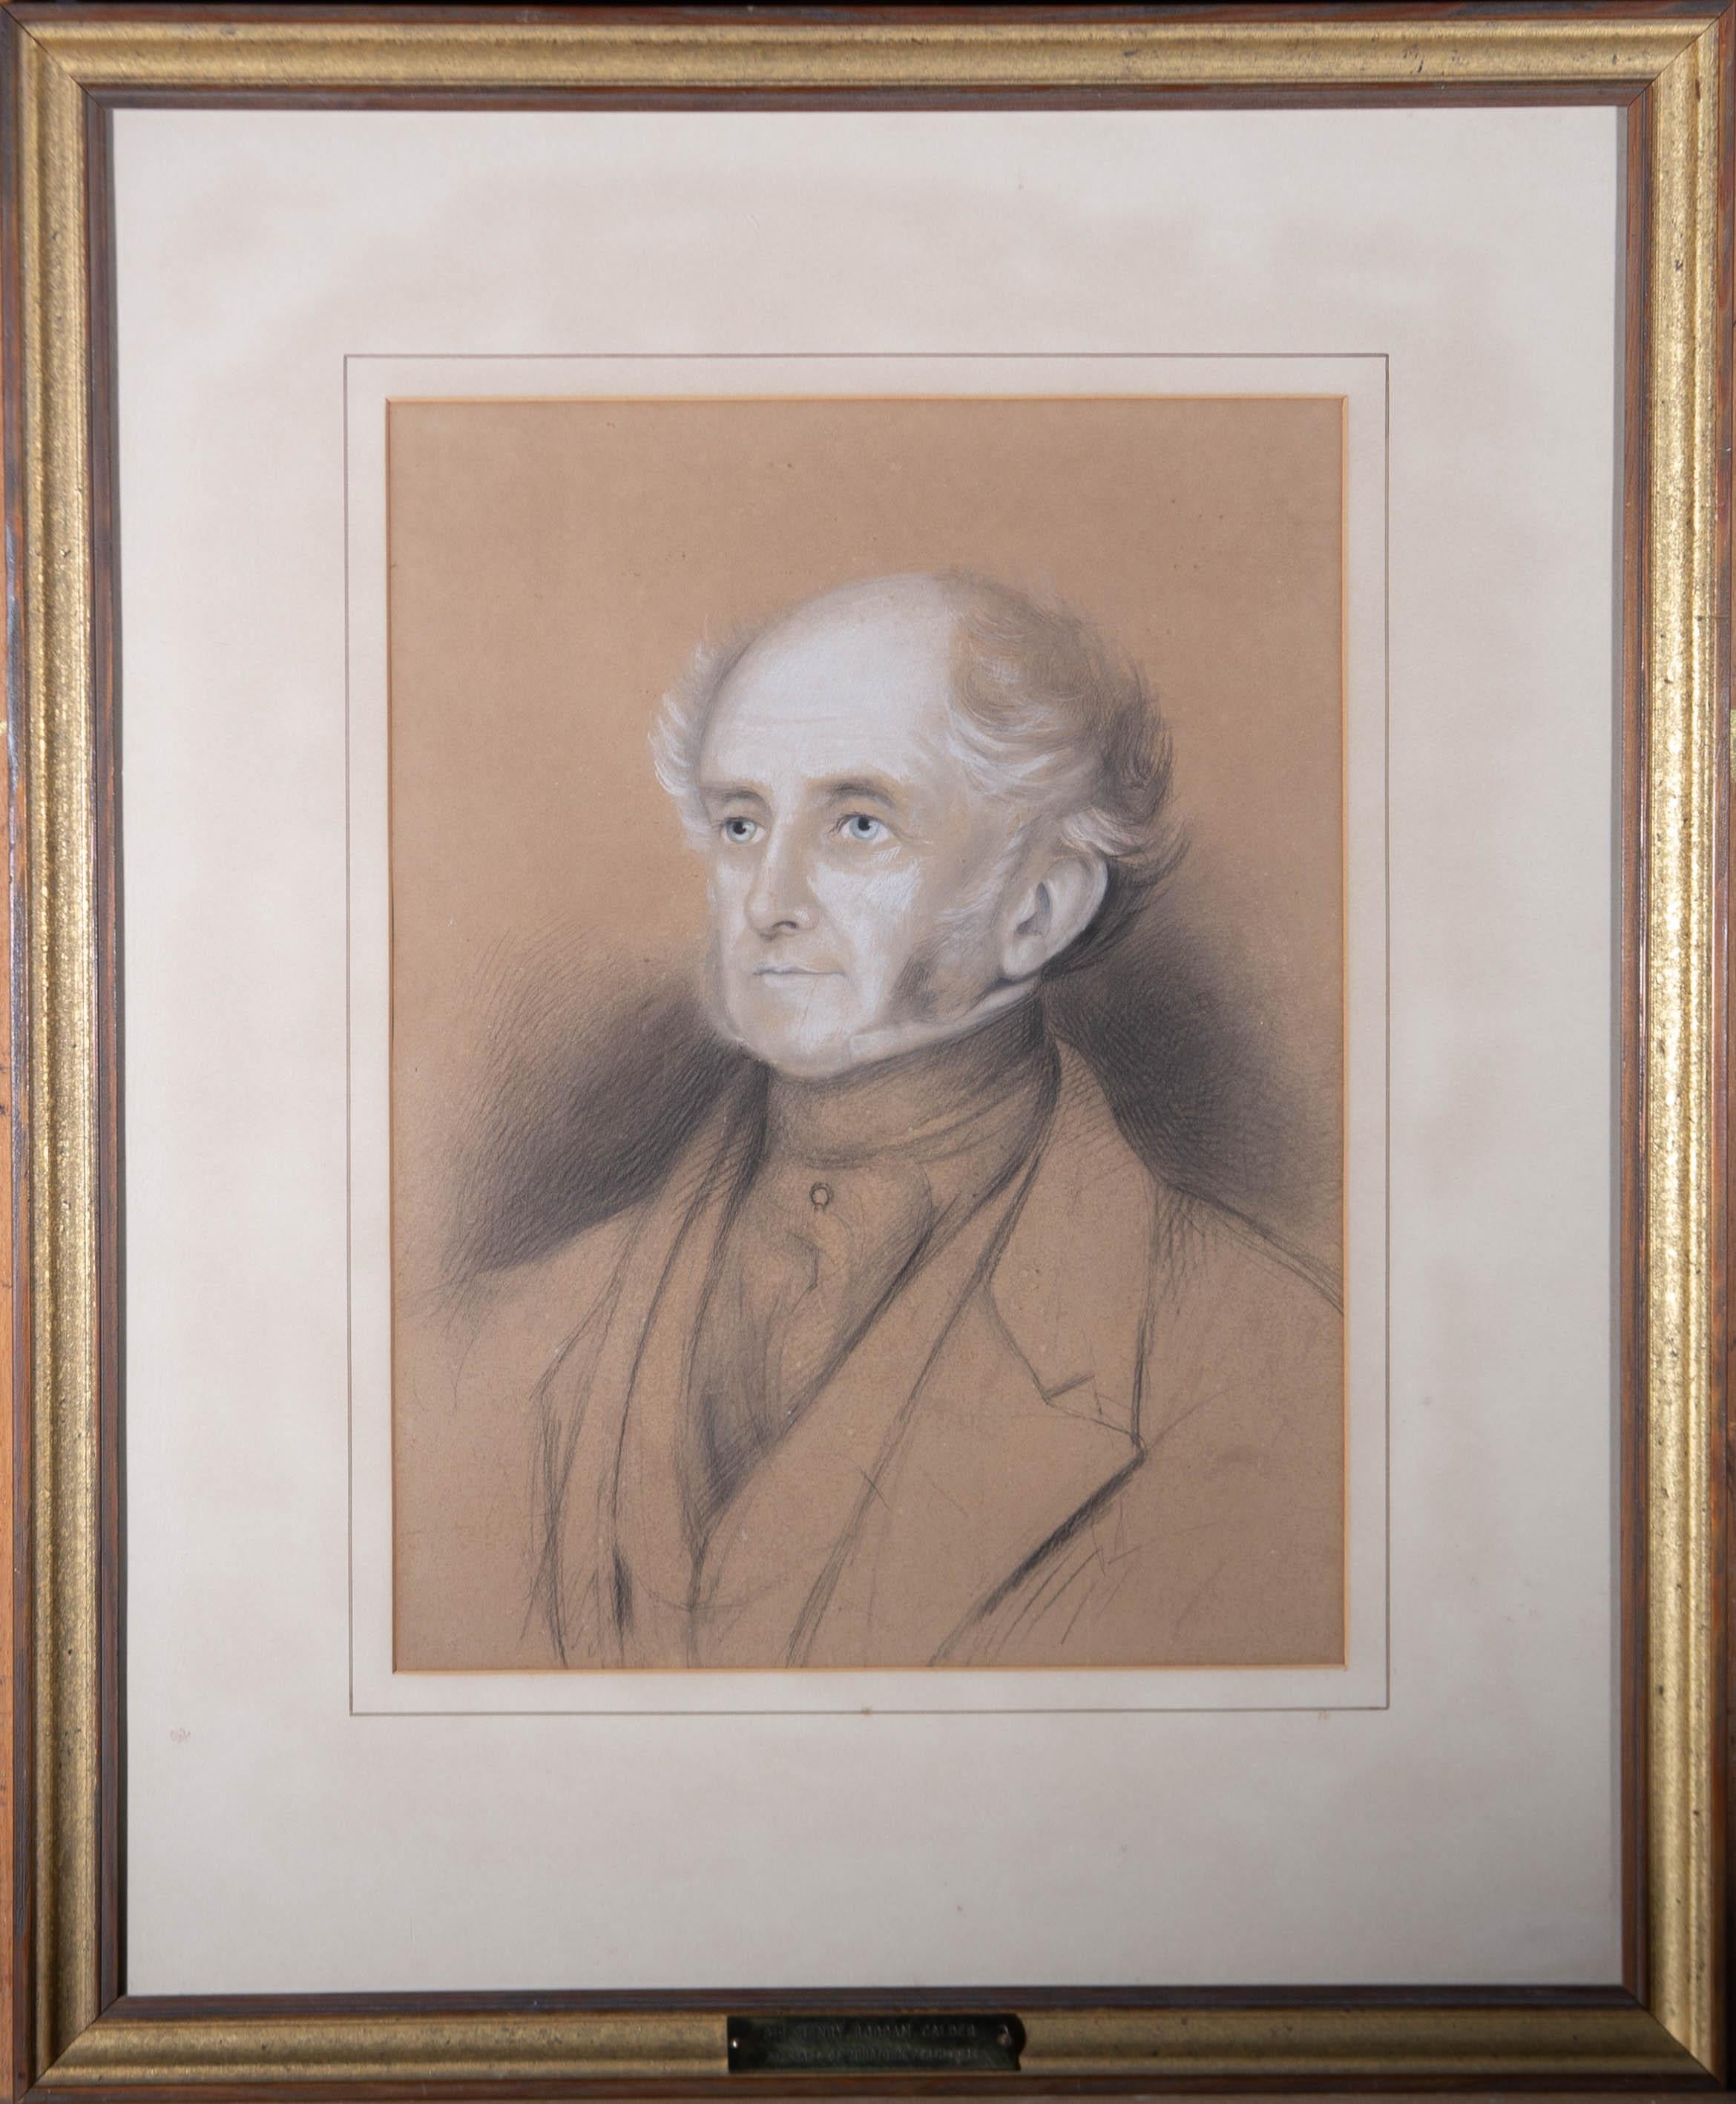 Unknown Portrait - Mid 19th Century Charcoal Drawing - Sir Henry Roddam Calder (1790-1868)